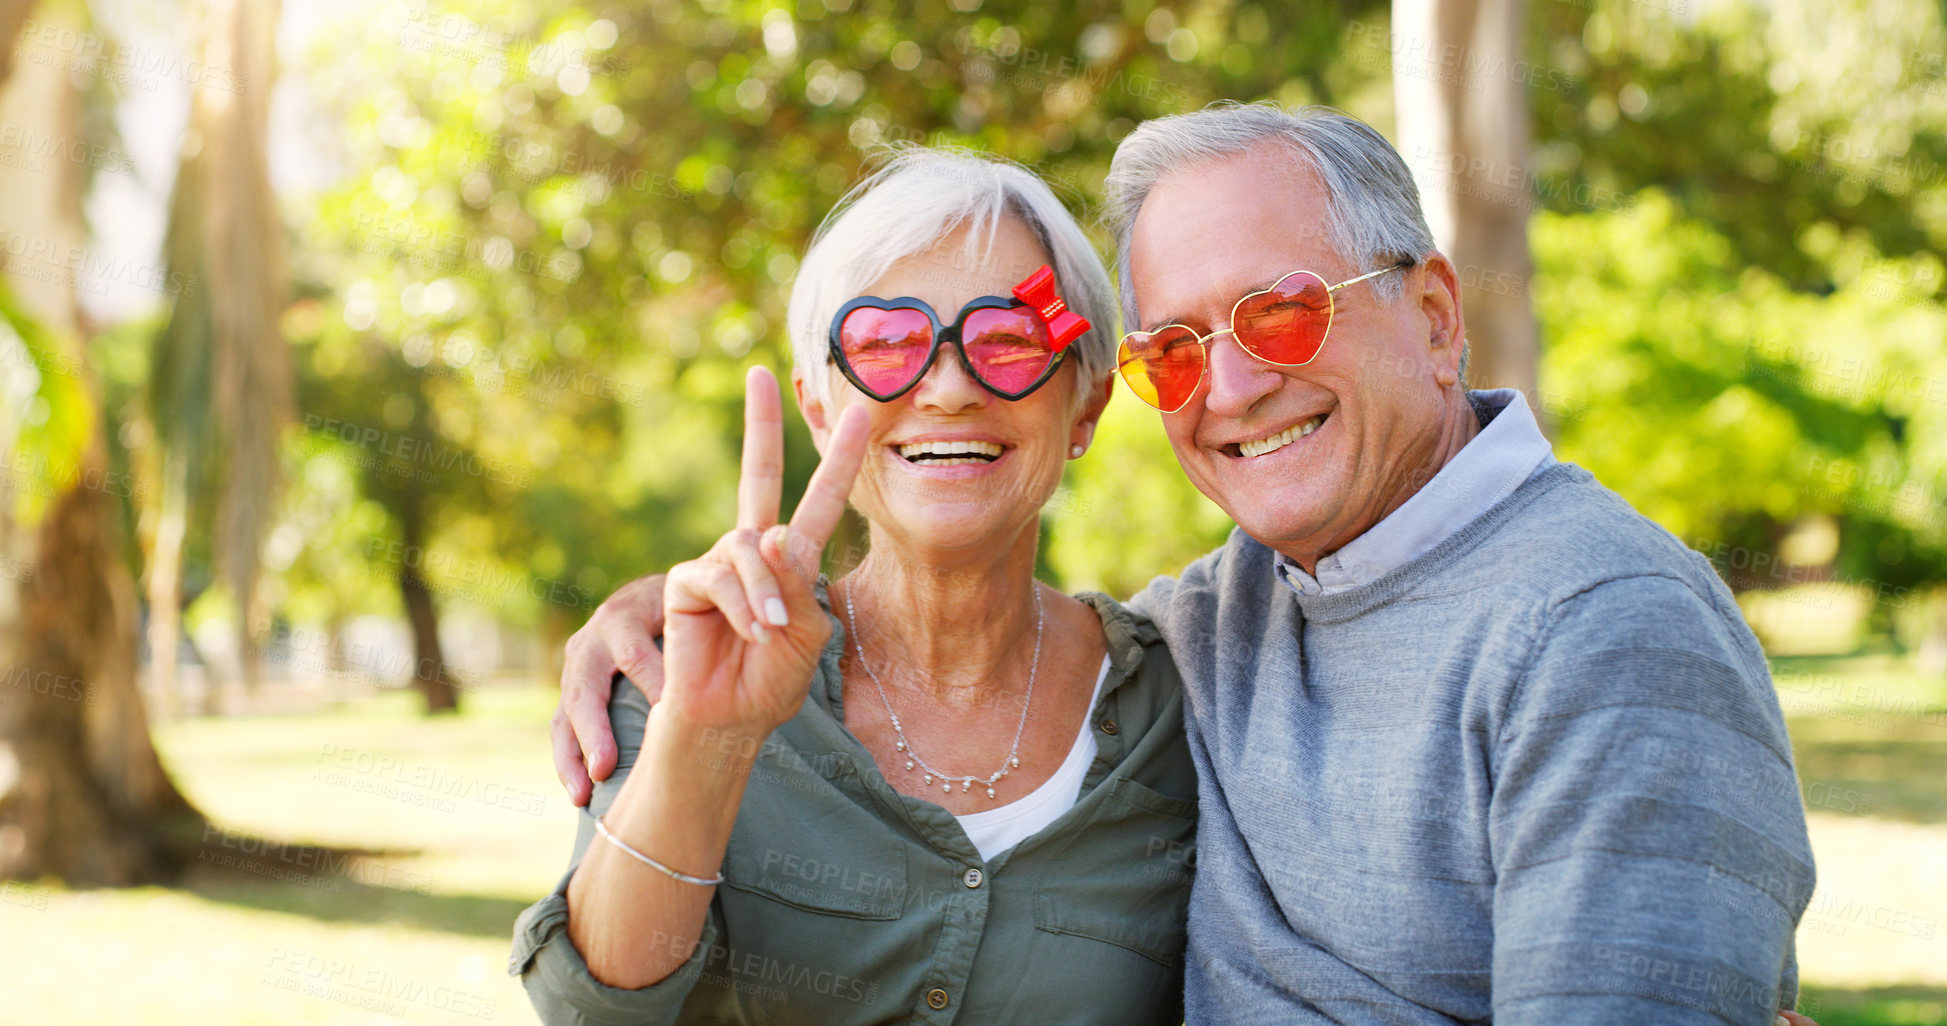 Buy stock photo Funny couple, peace sign and portrait outdoor at a park with love, care and hand emoji. A happy senior man and woman with comic sunglasses in nature for happiness, healthy marriage and retirement fun